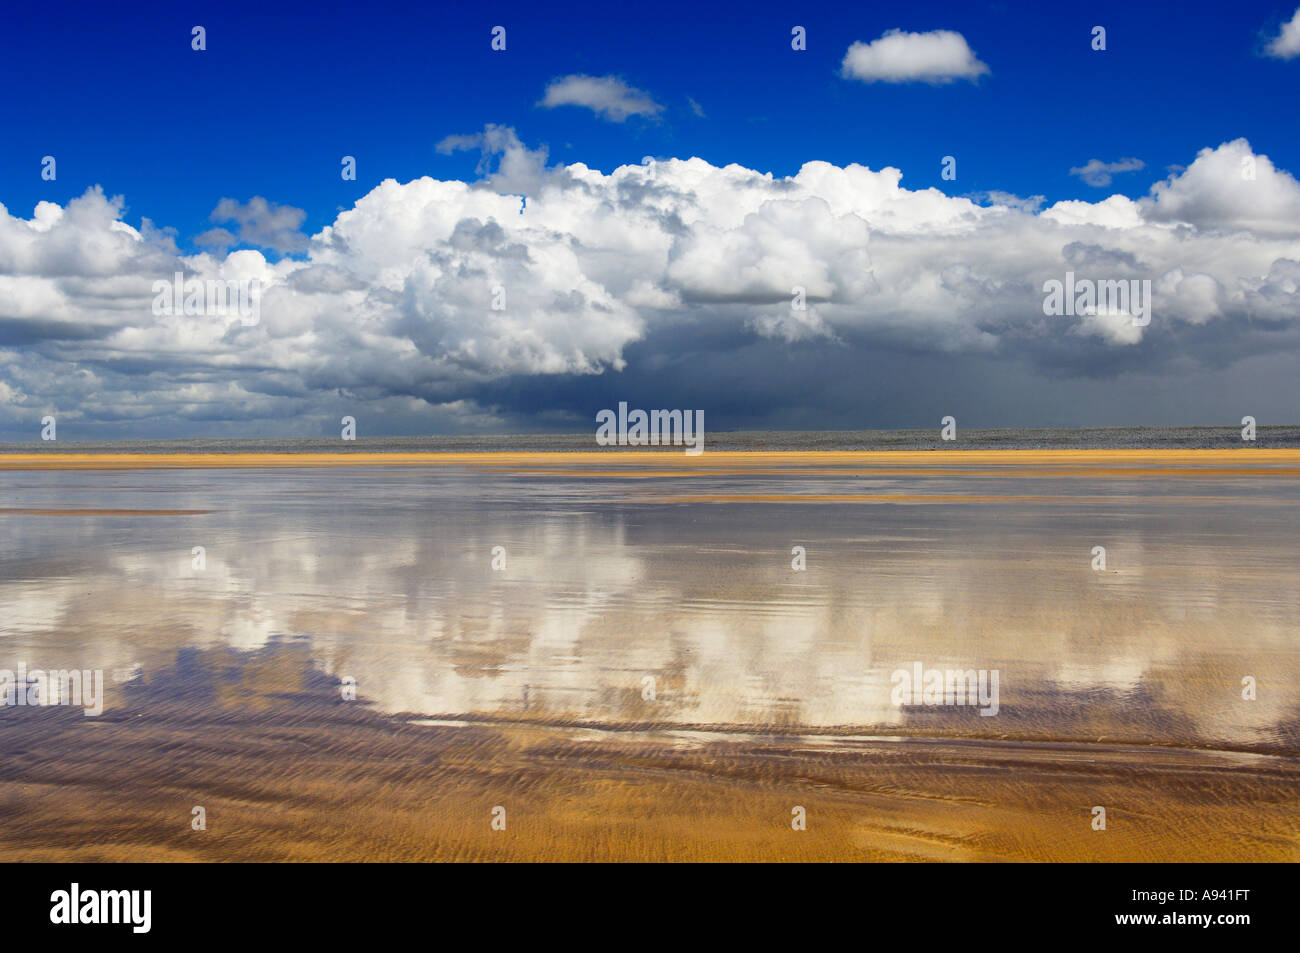 Cloudscape over the mile long sands of Westward Ho! beach in England. Stock Photo